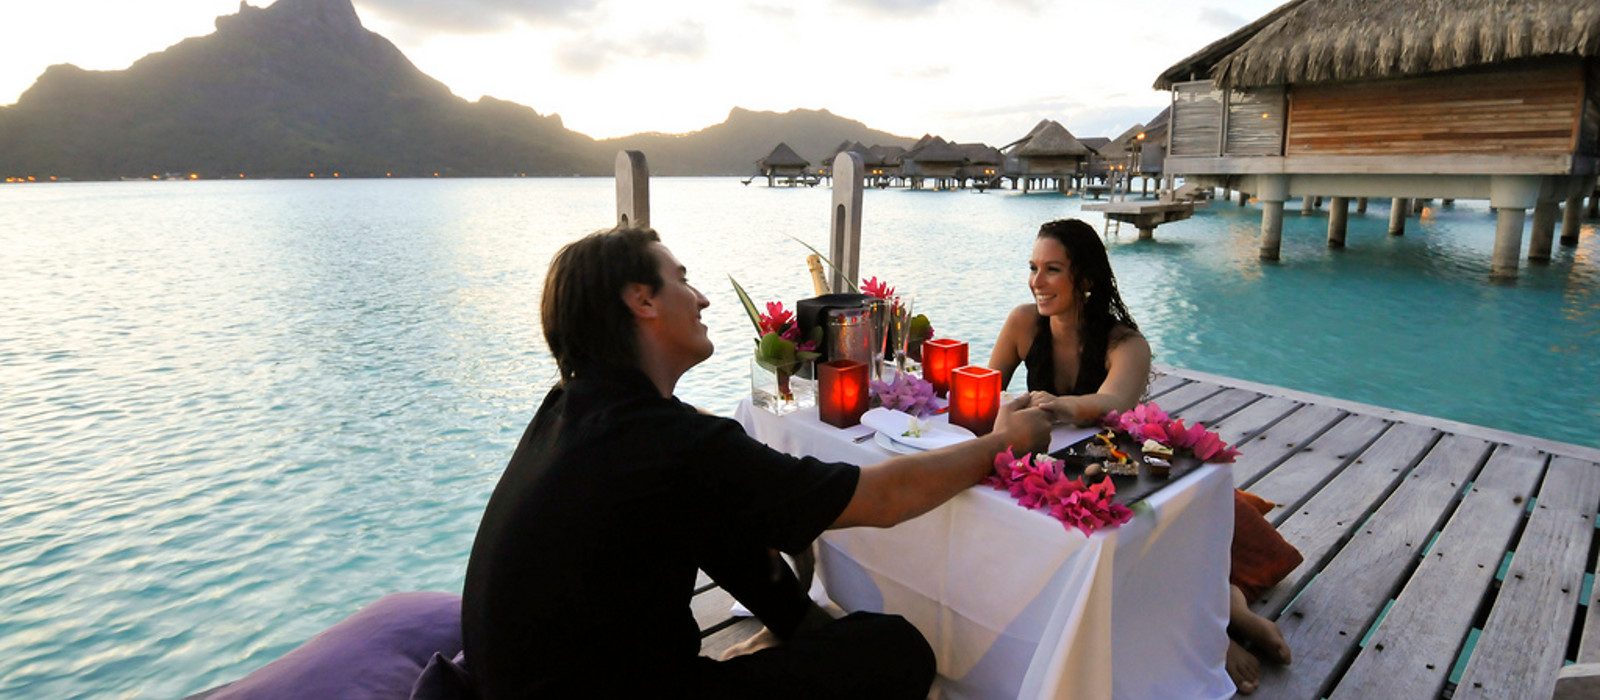 book online your tours and romnatic activities in French Polynesia